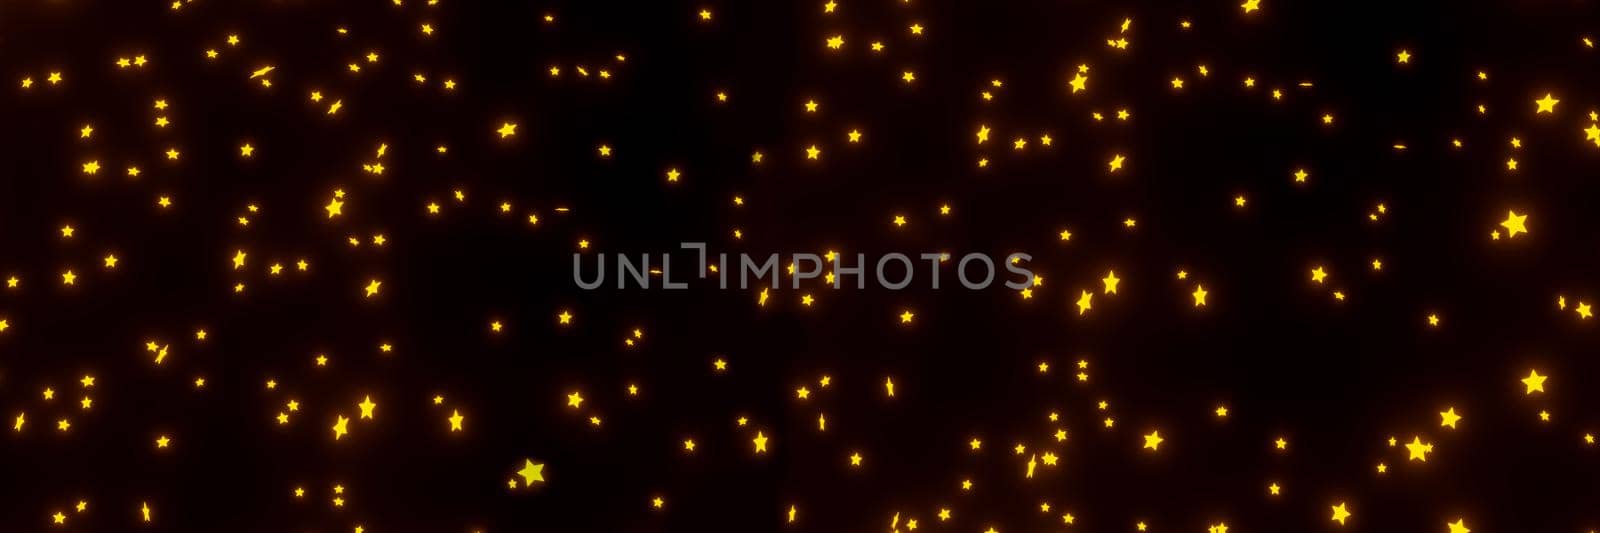 3D Render of many small yellow orange particles by lavsketch